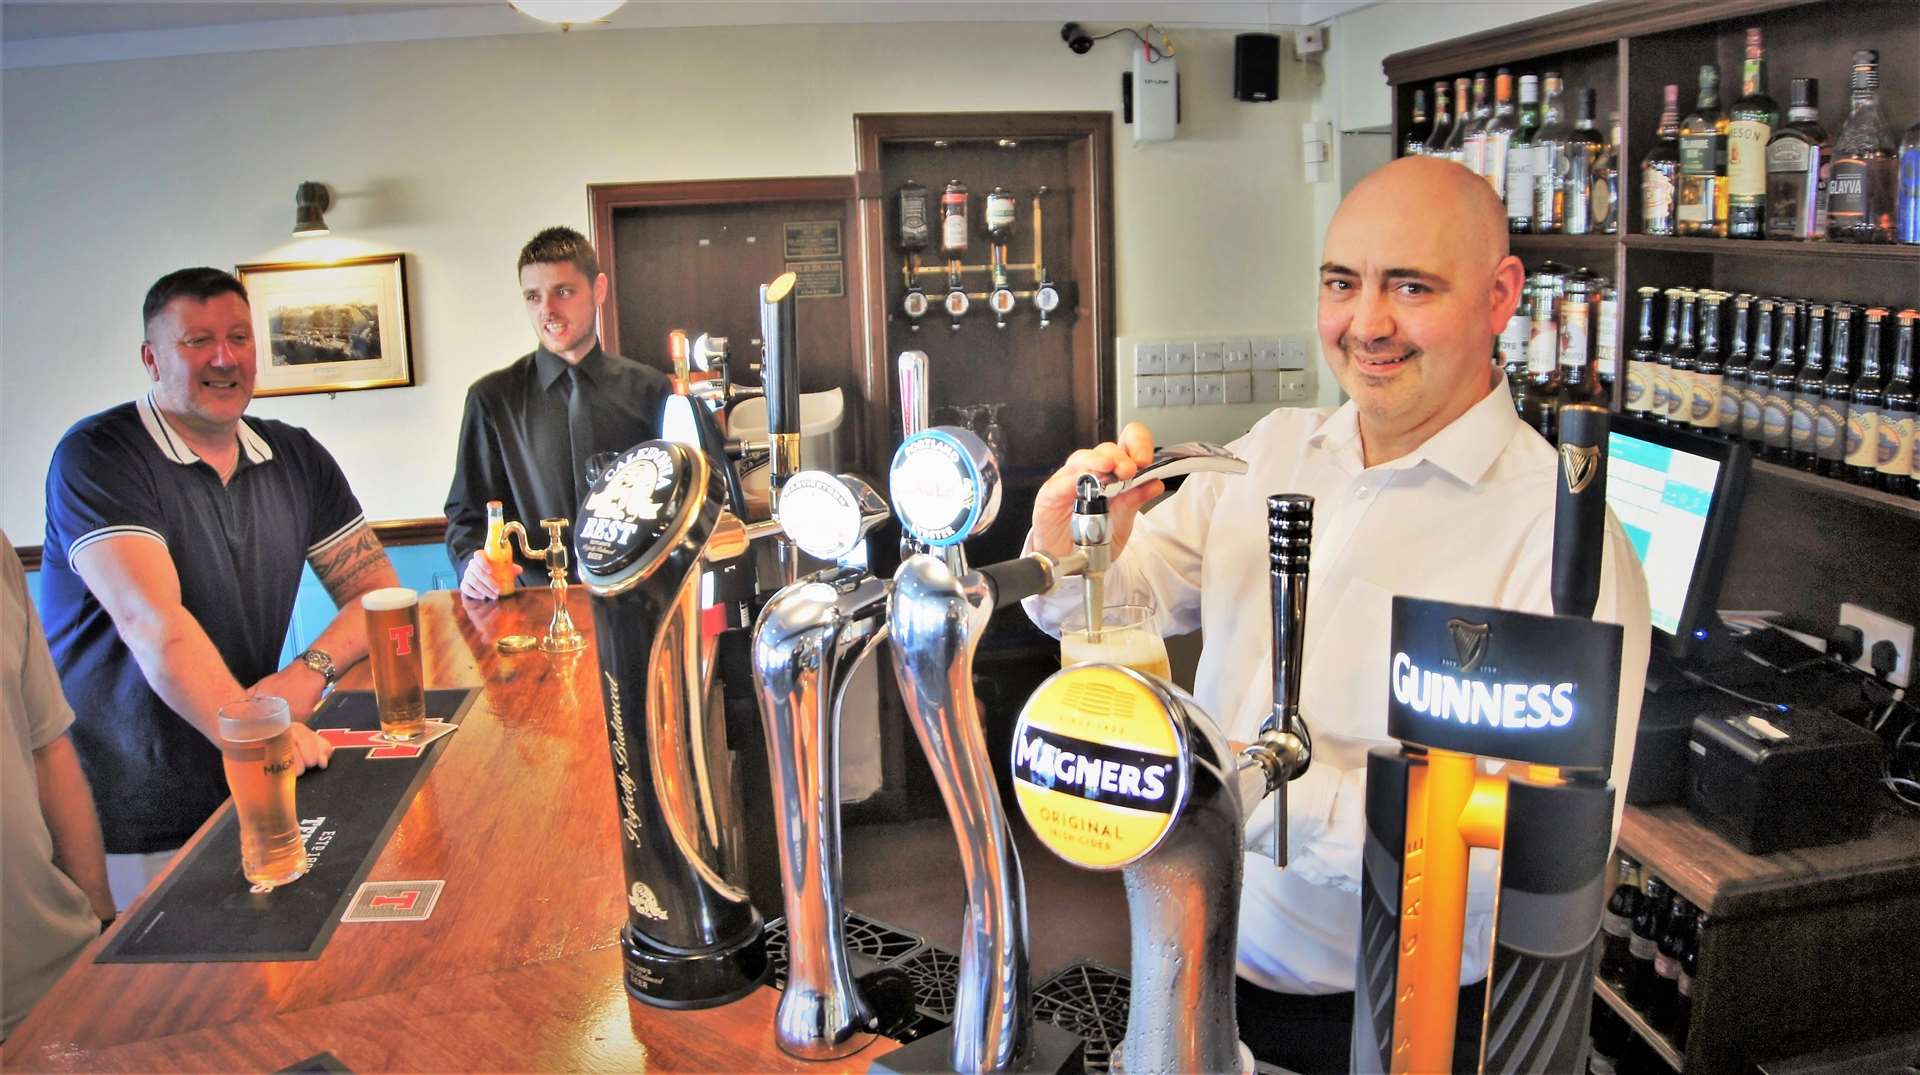 Steven Swan pulling a pint before lockdown. He urges the public to 'buy a meal for those that heal'. Pictures: DGS